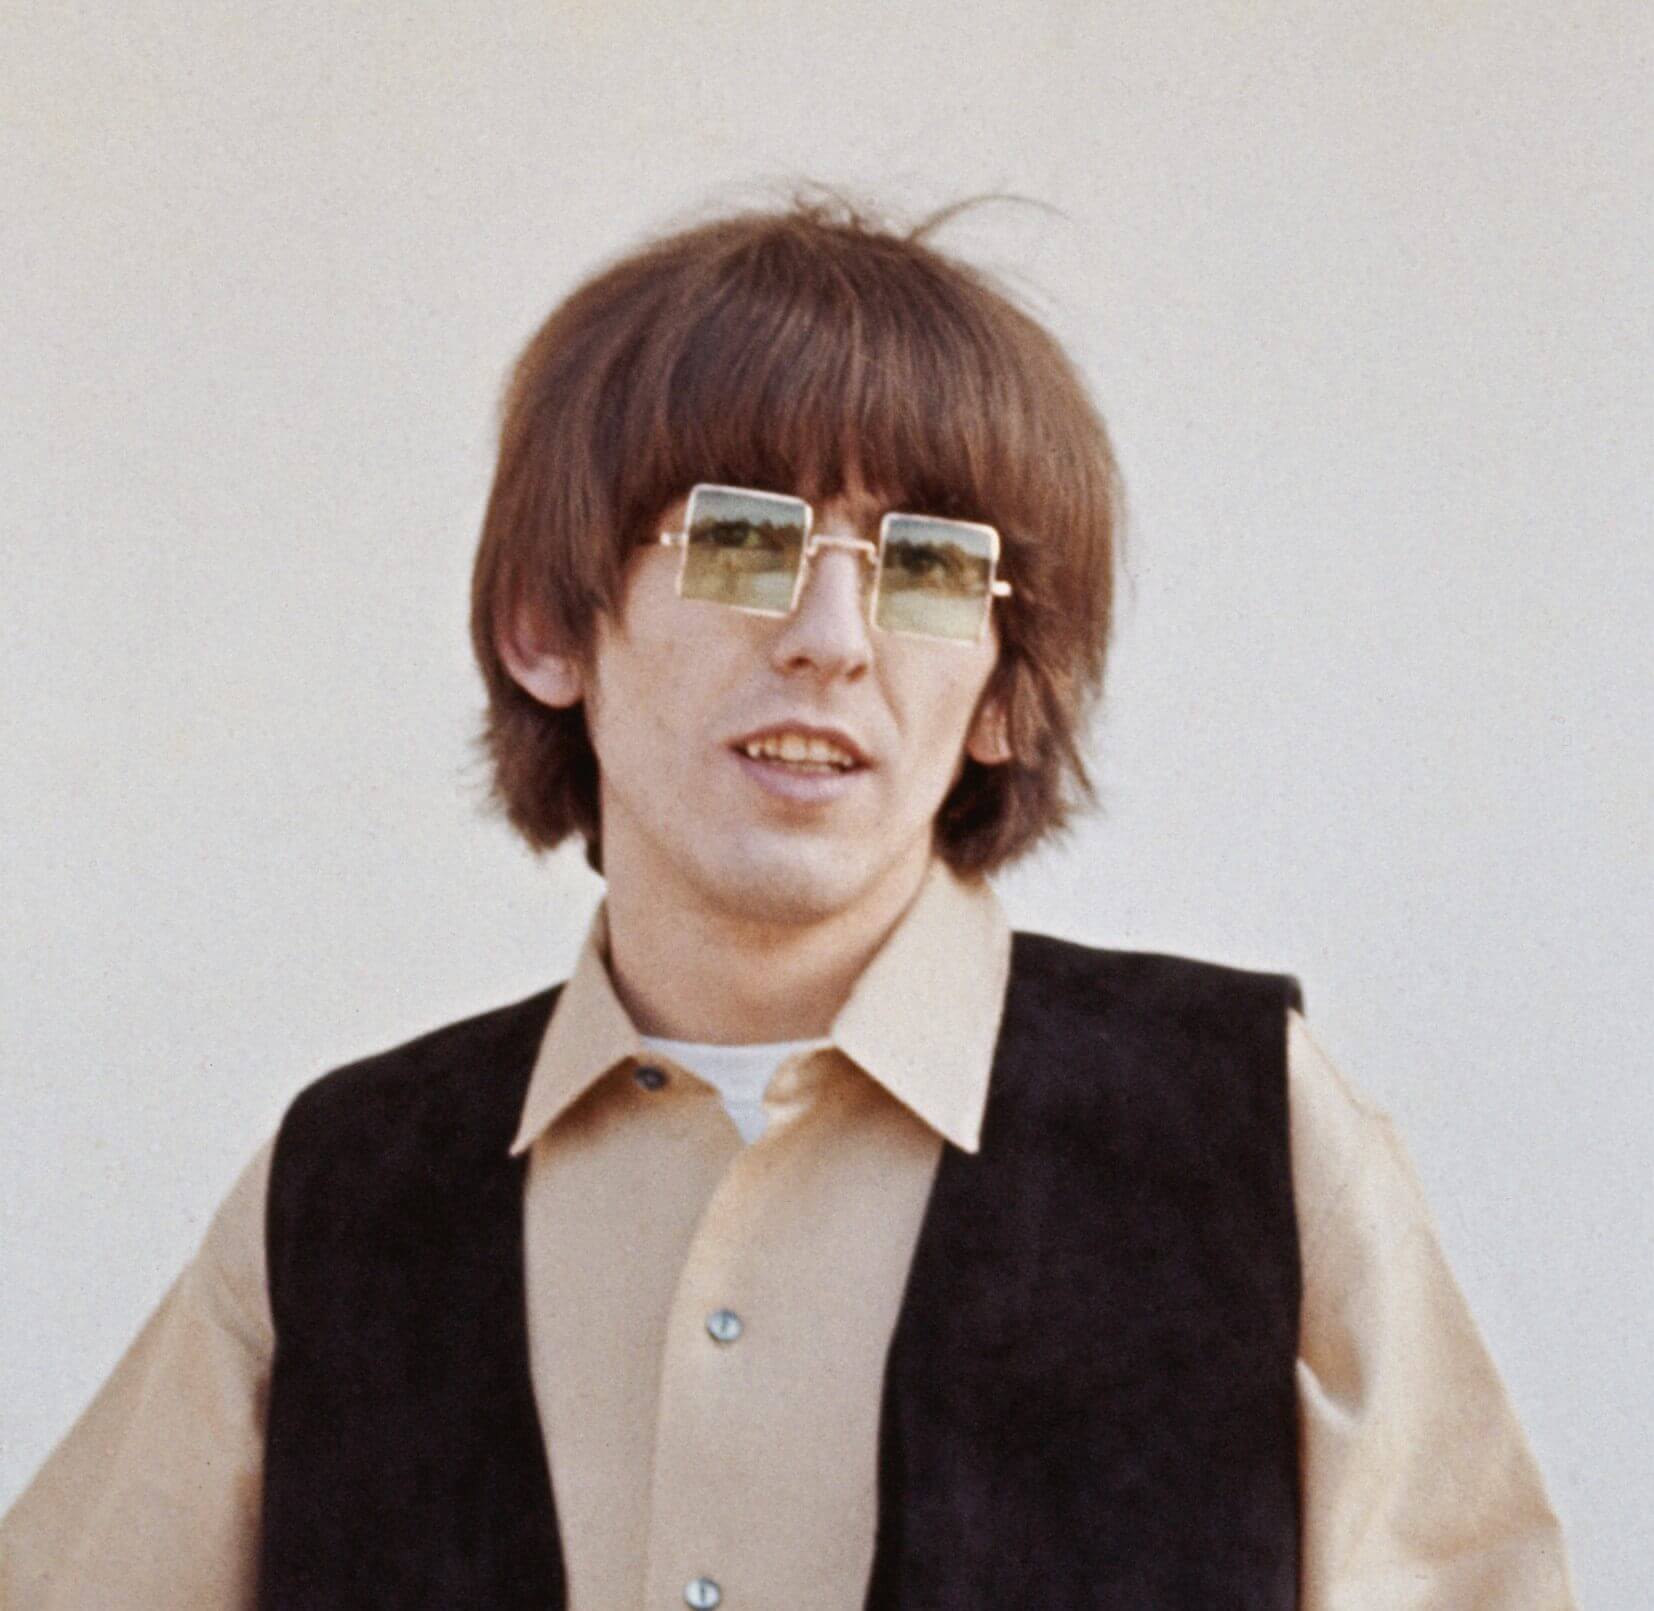 George Harrison, the inspiration for Oasis' "Wonderwall," wearing a vest